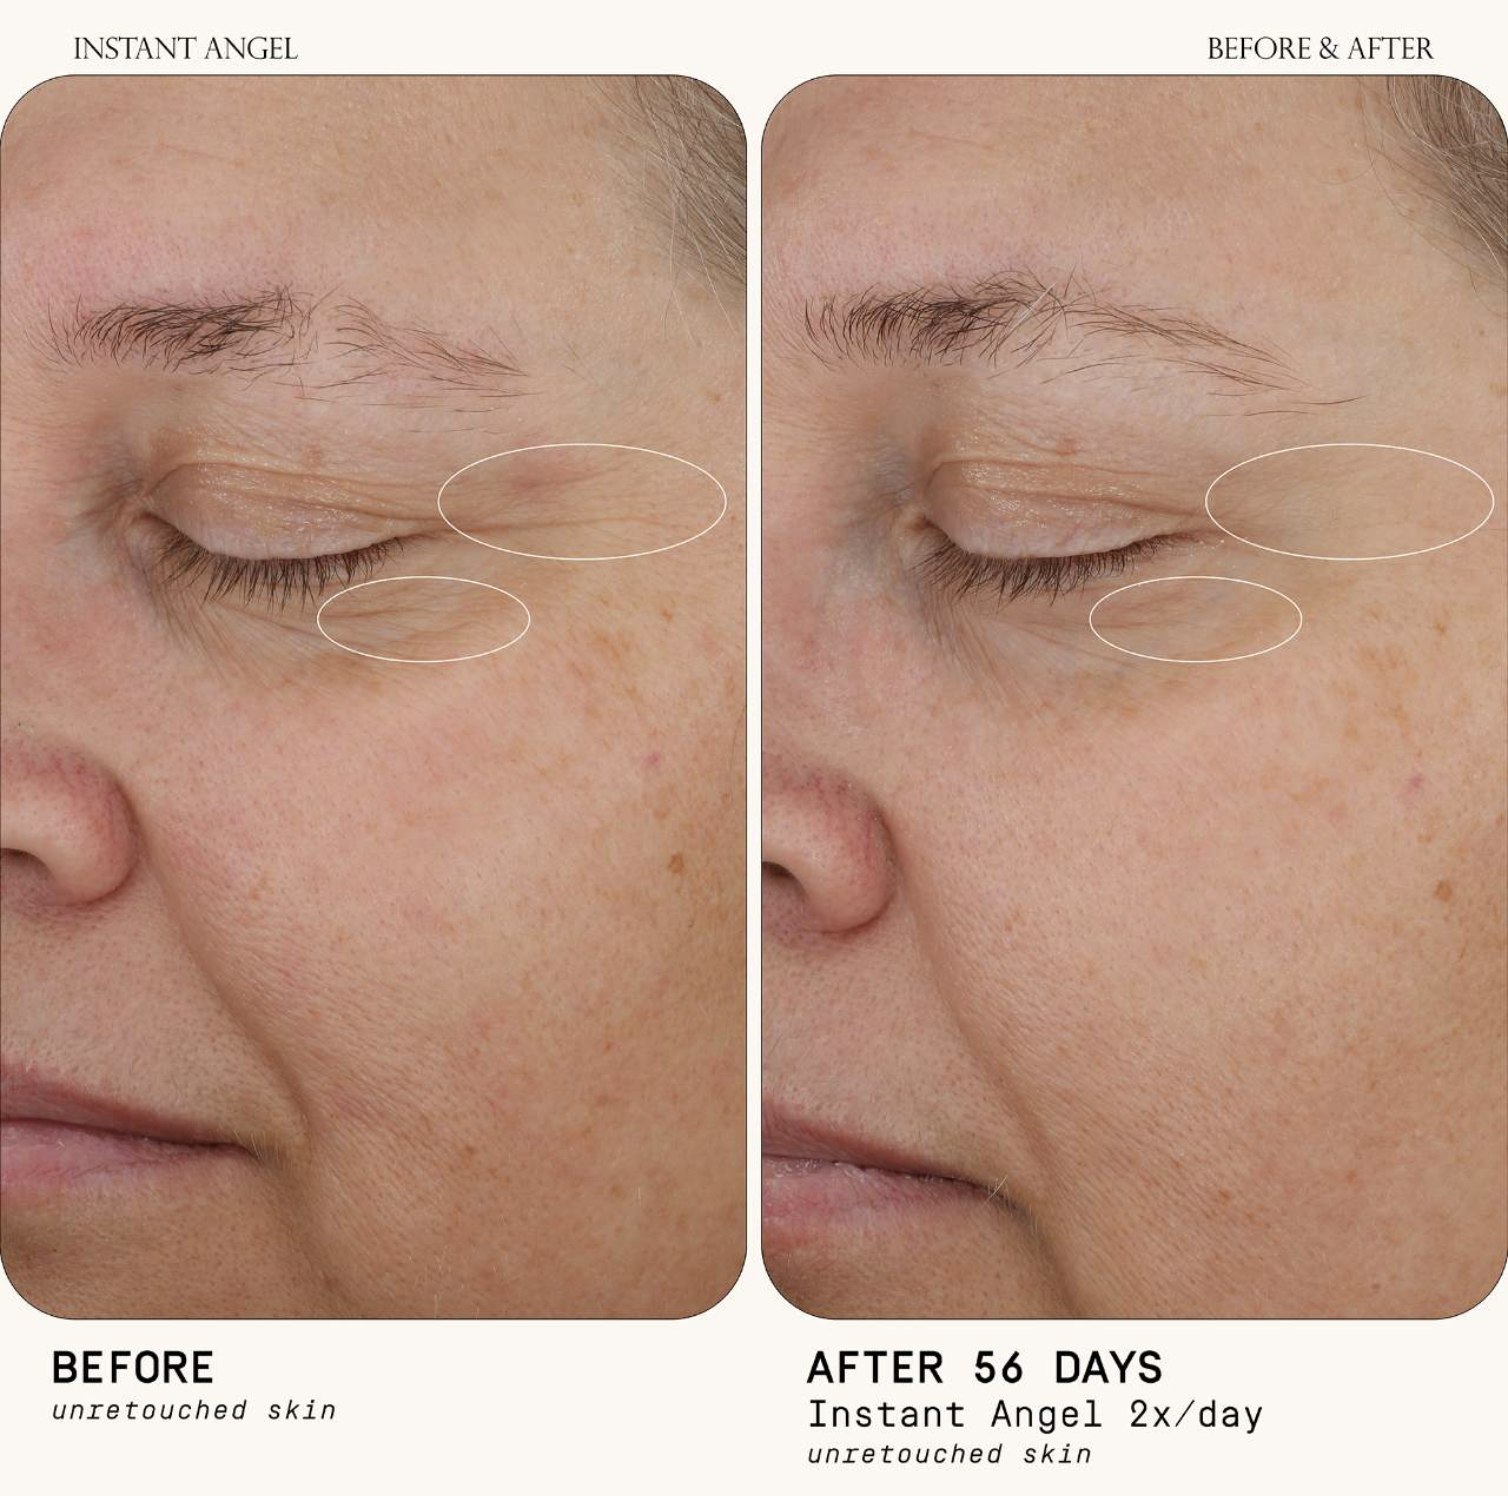 Close-up comparison of skin before and after 56 days using Instant Angel cream, showing visible improvement